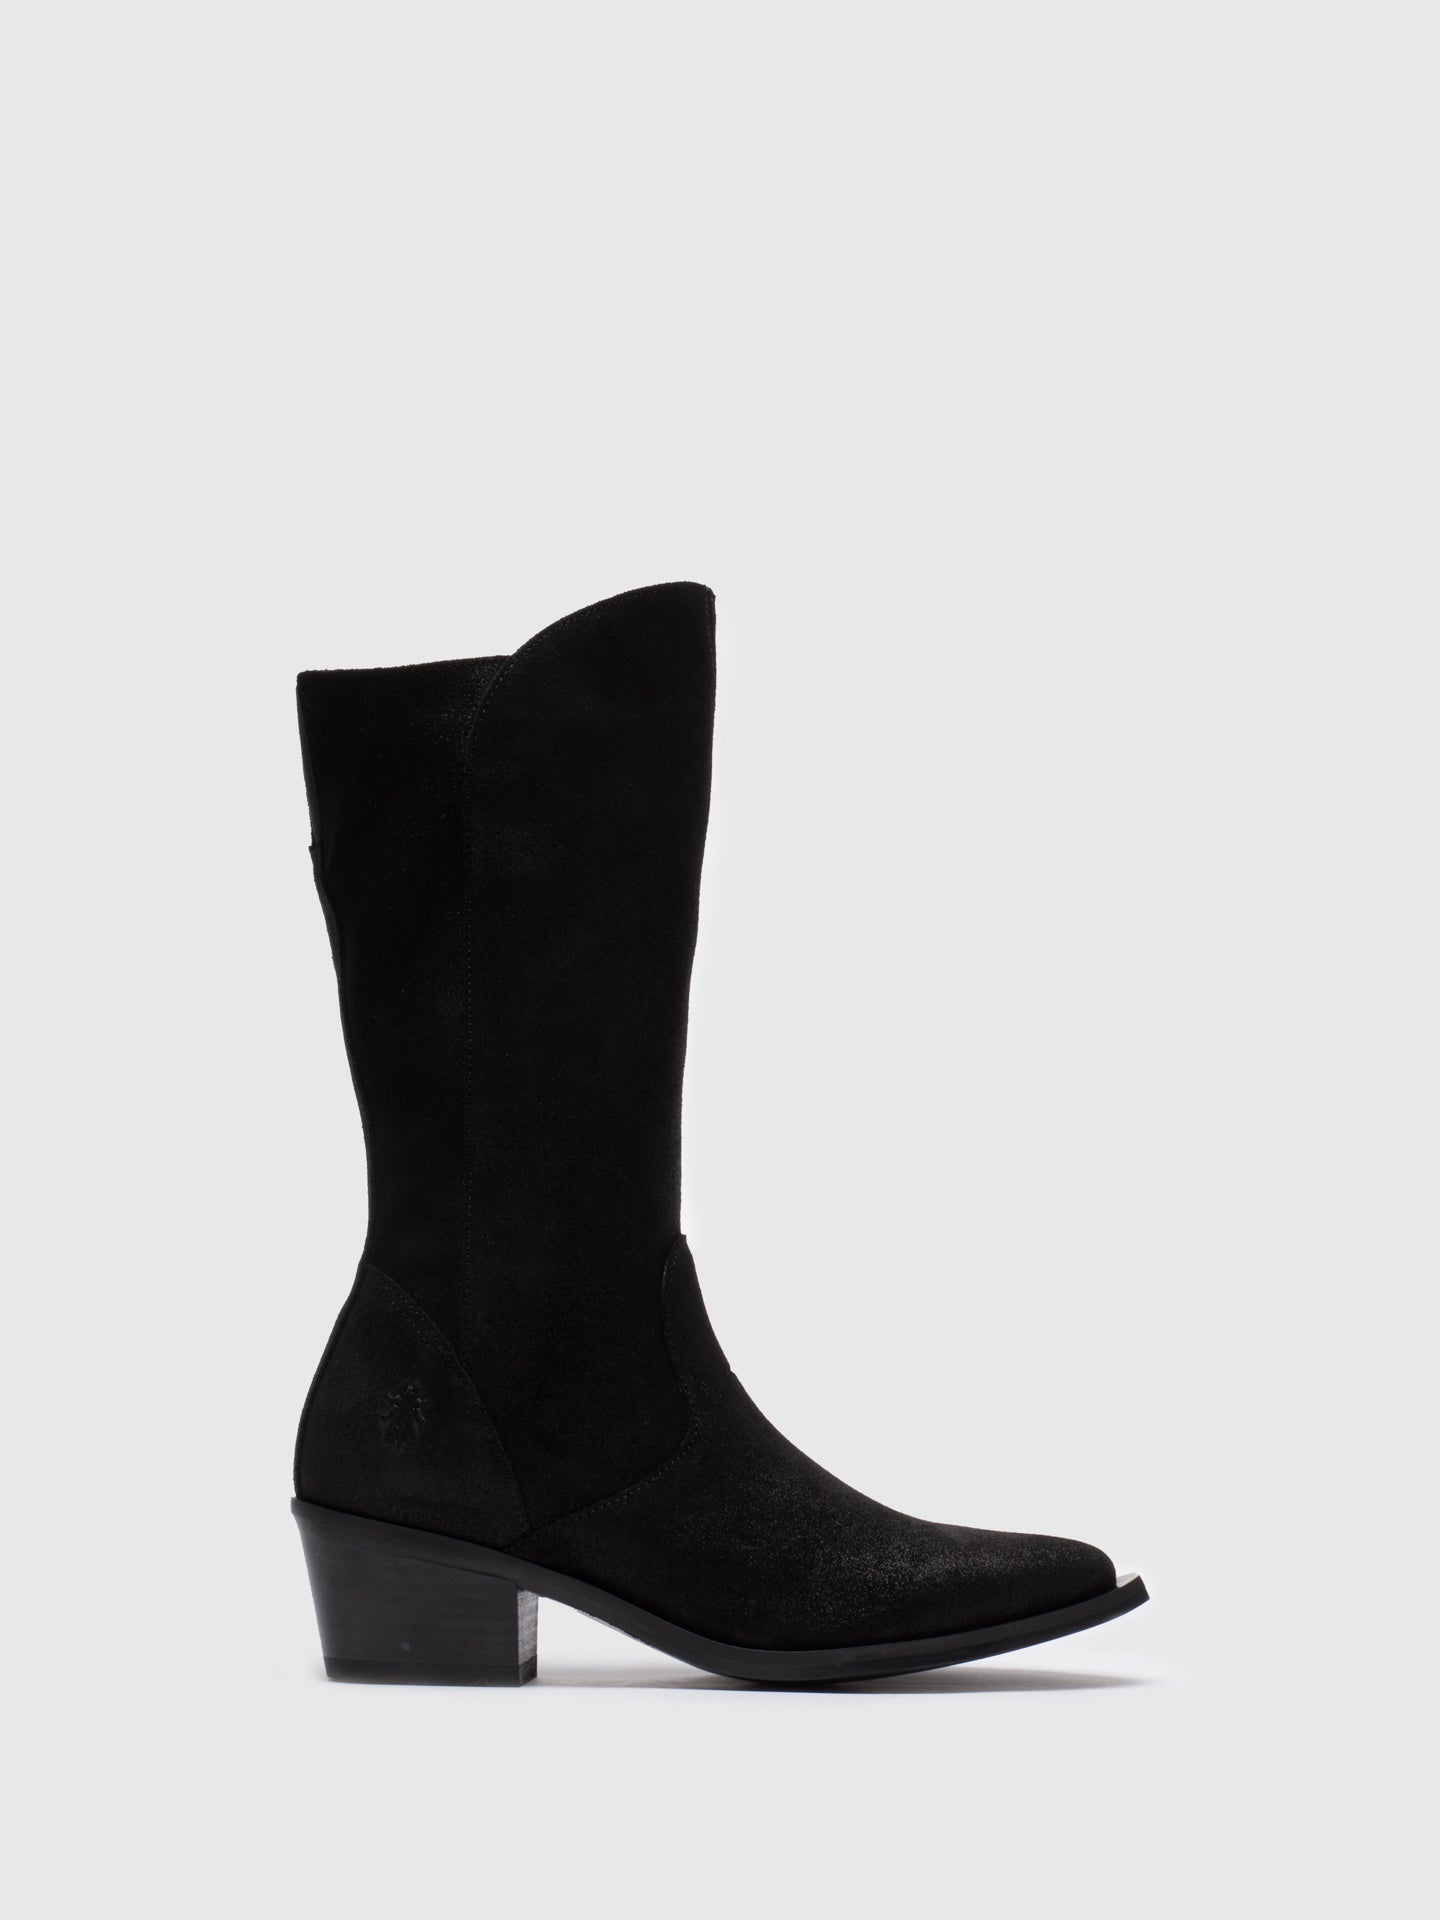 Fly London Black Zip Up Boots